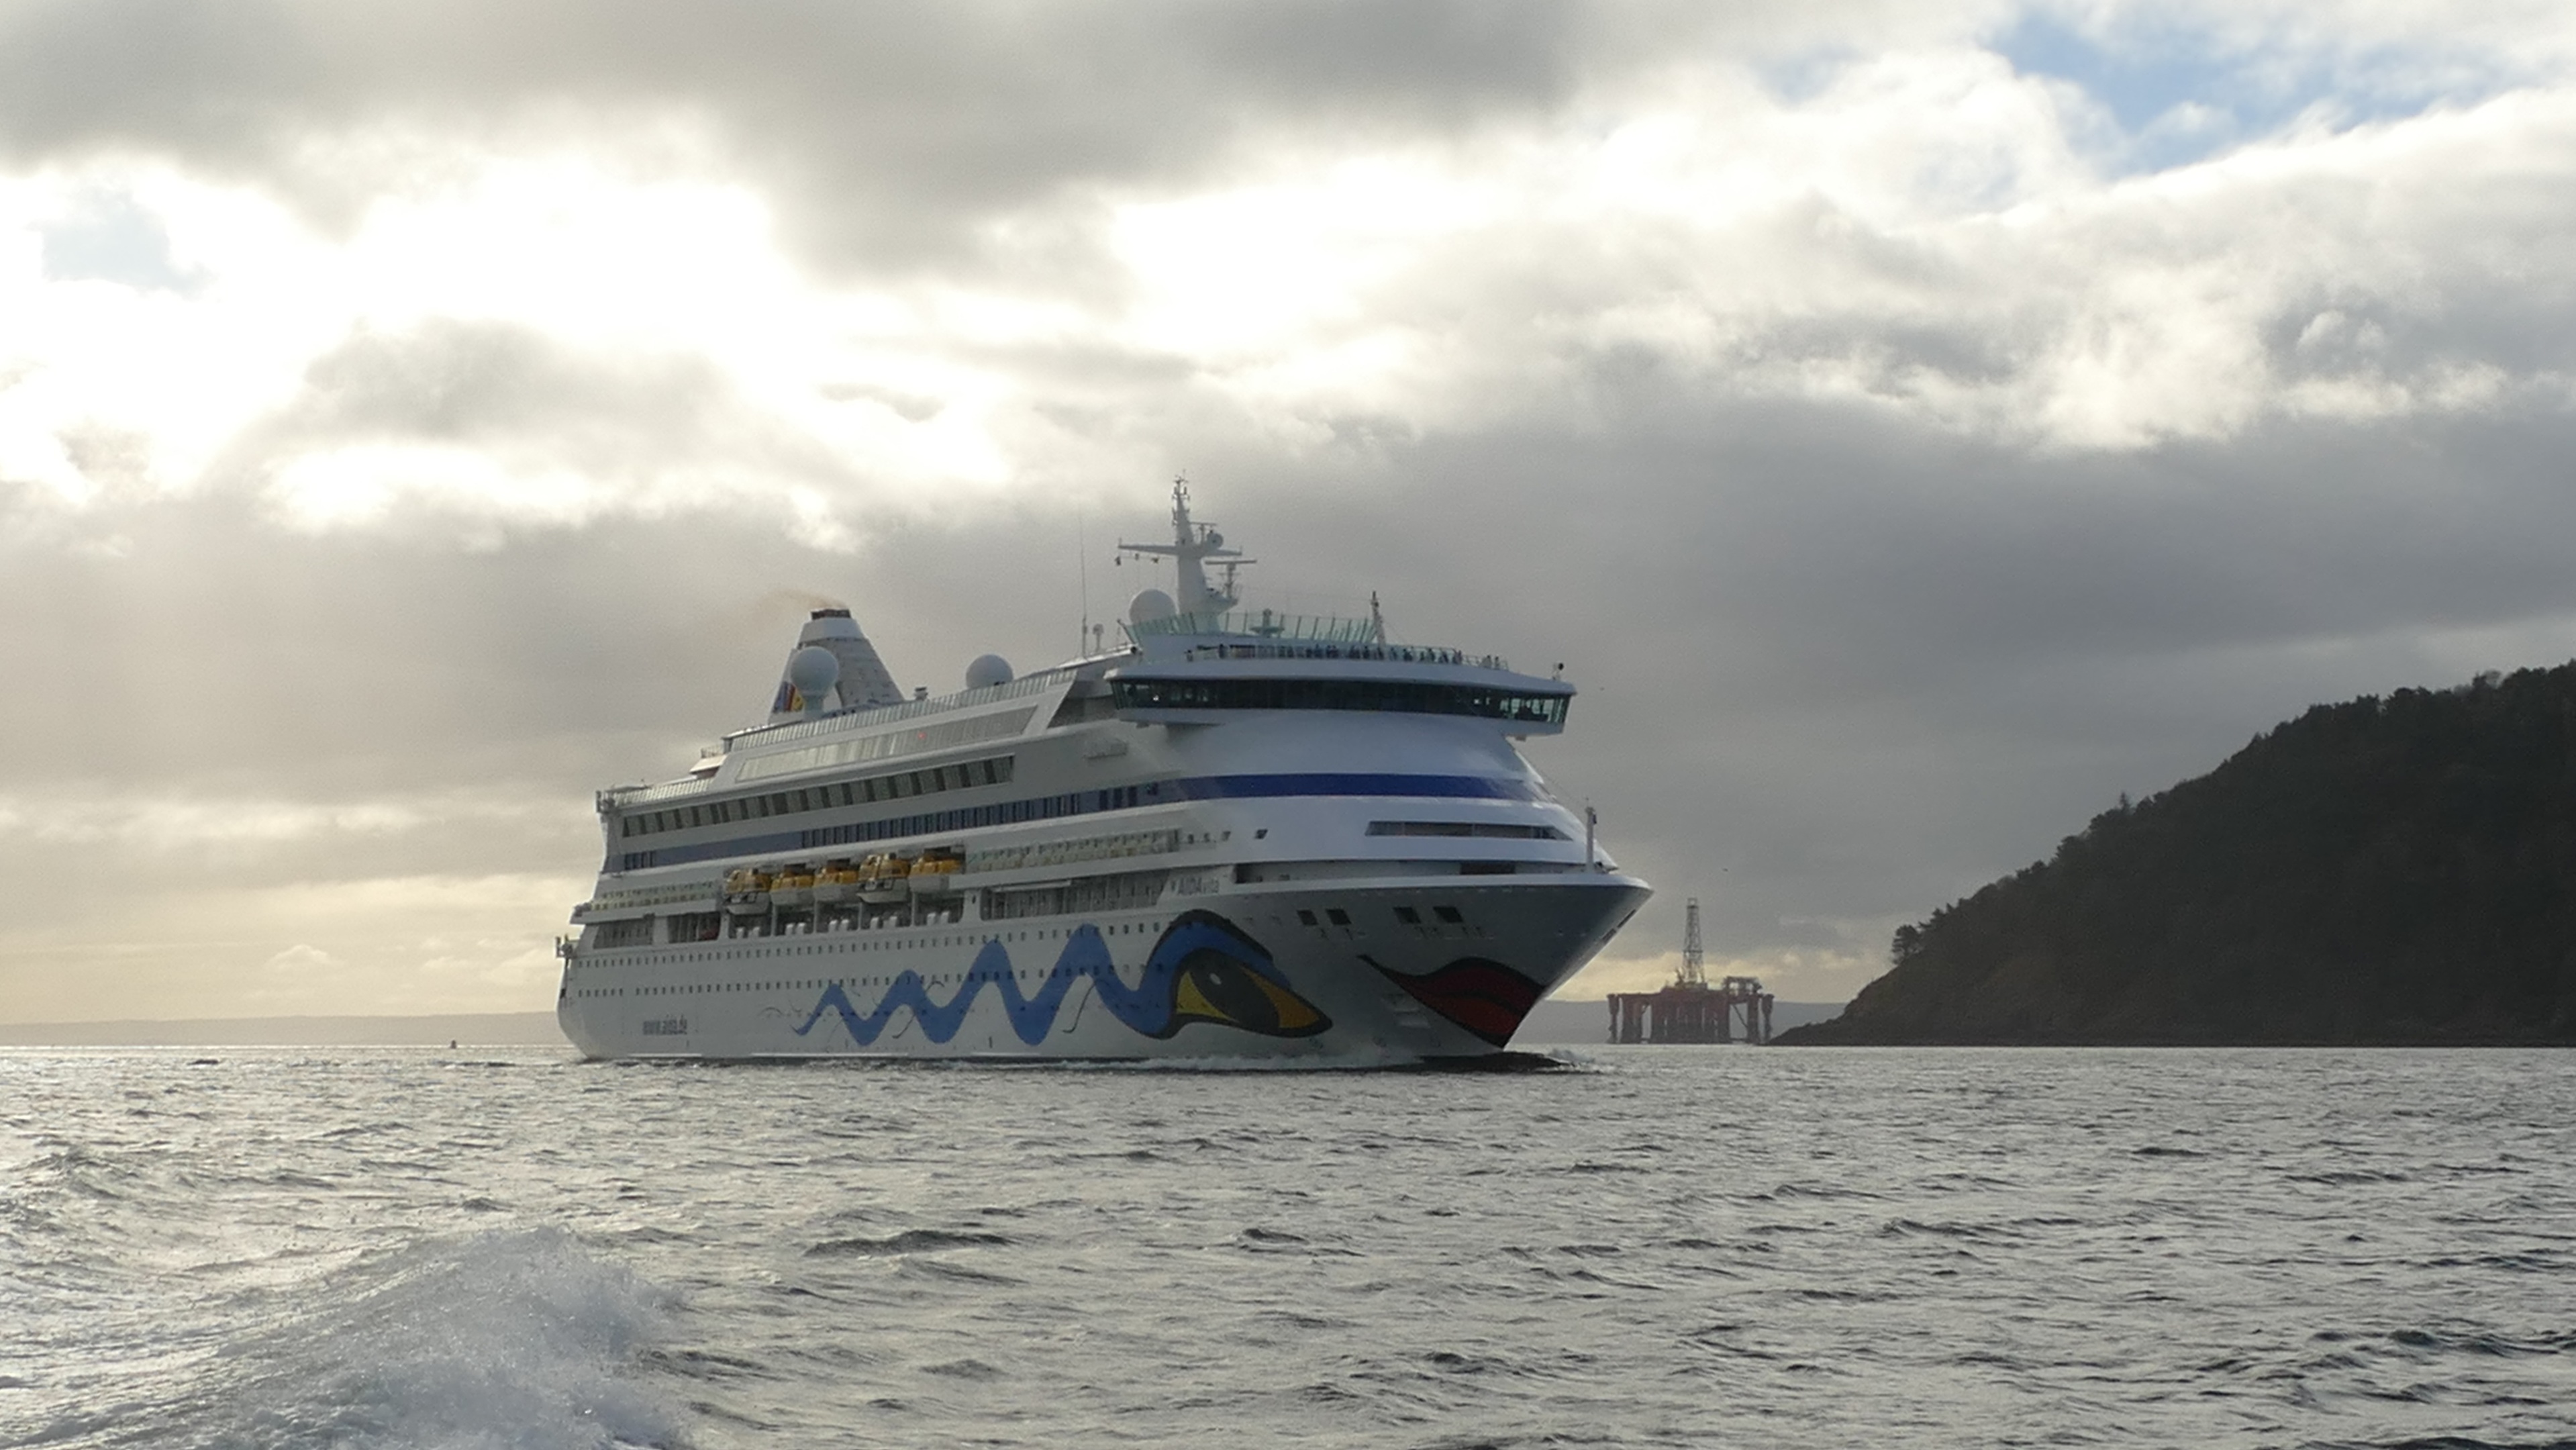 The AIDAVita arriving in the Cromarty Firth yesterday, marking the start of a new cruise liner season at Invergordon.